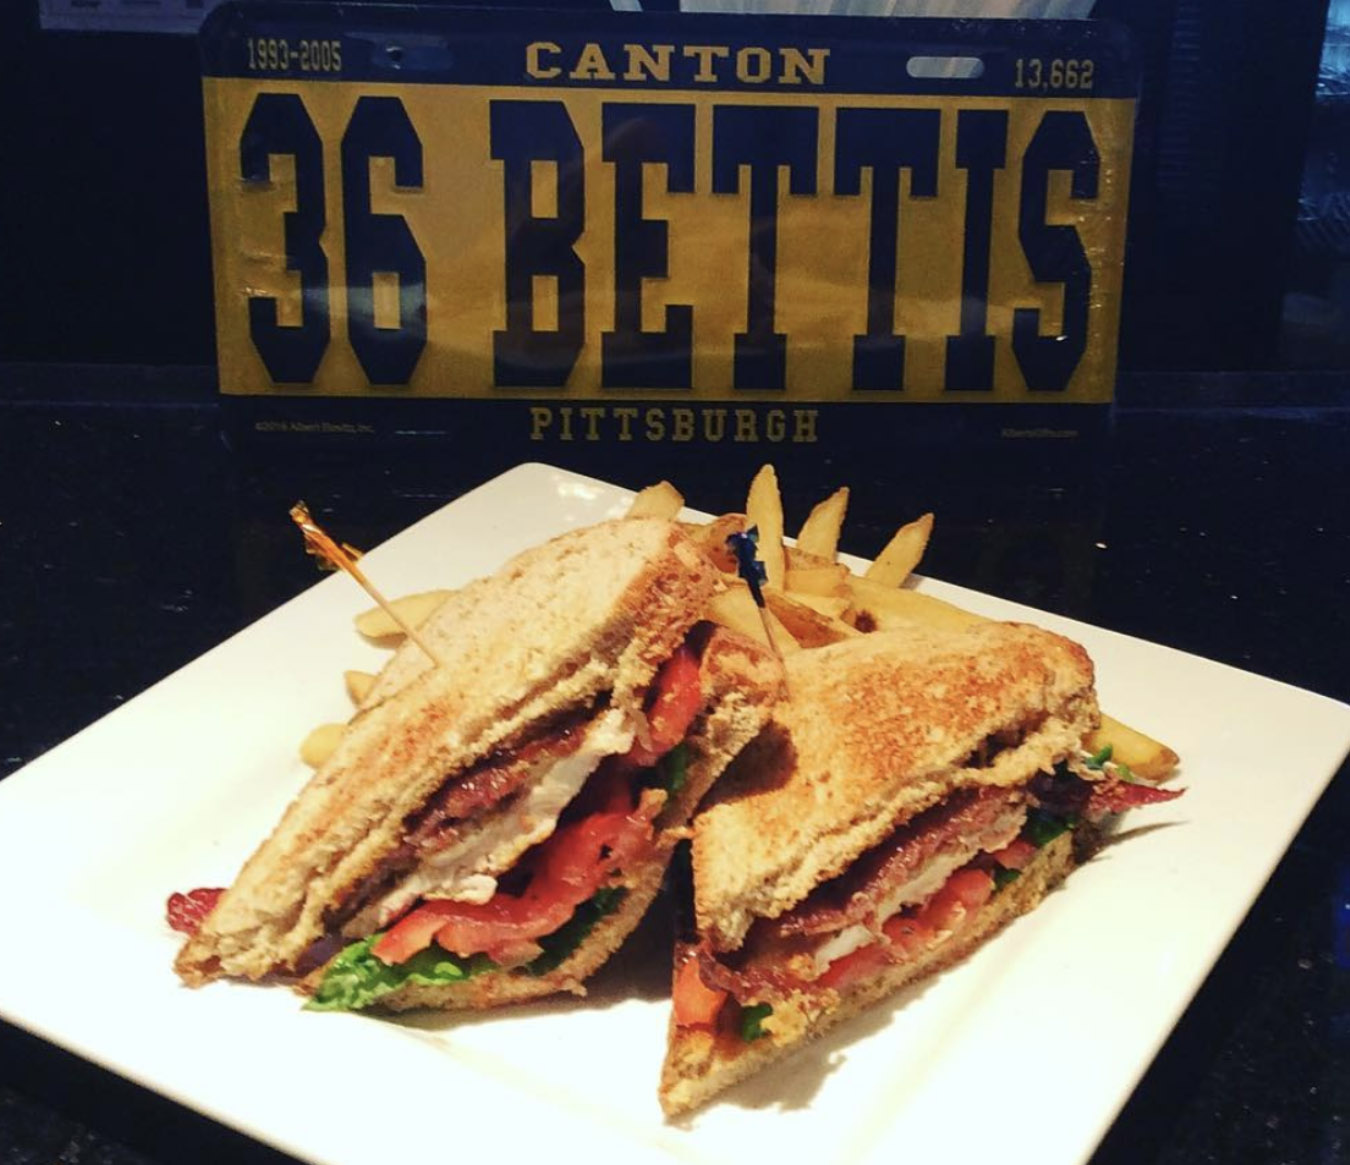 Where To Eat In Pittsburgh - Jerome Bettis' Grille 36